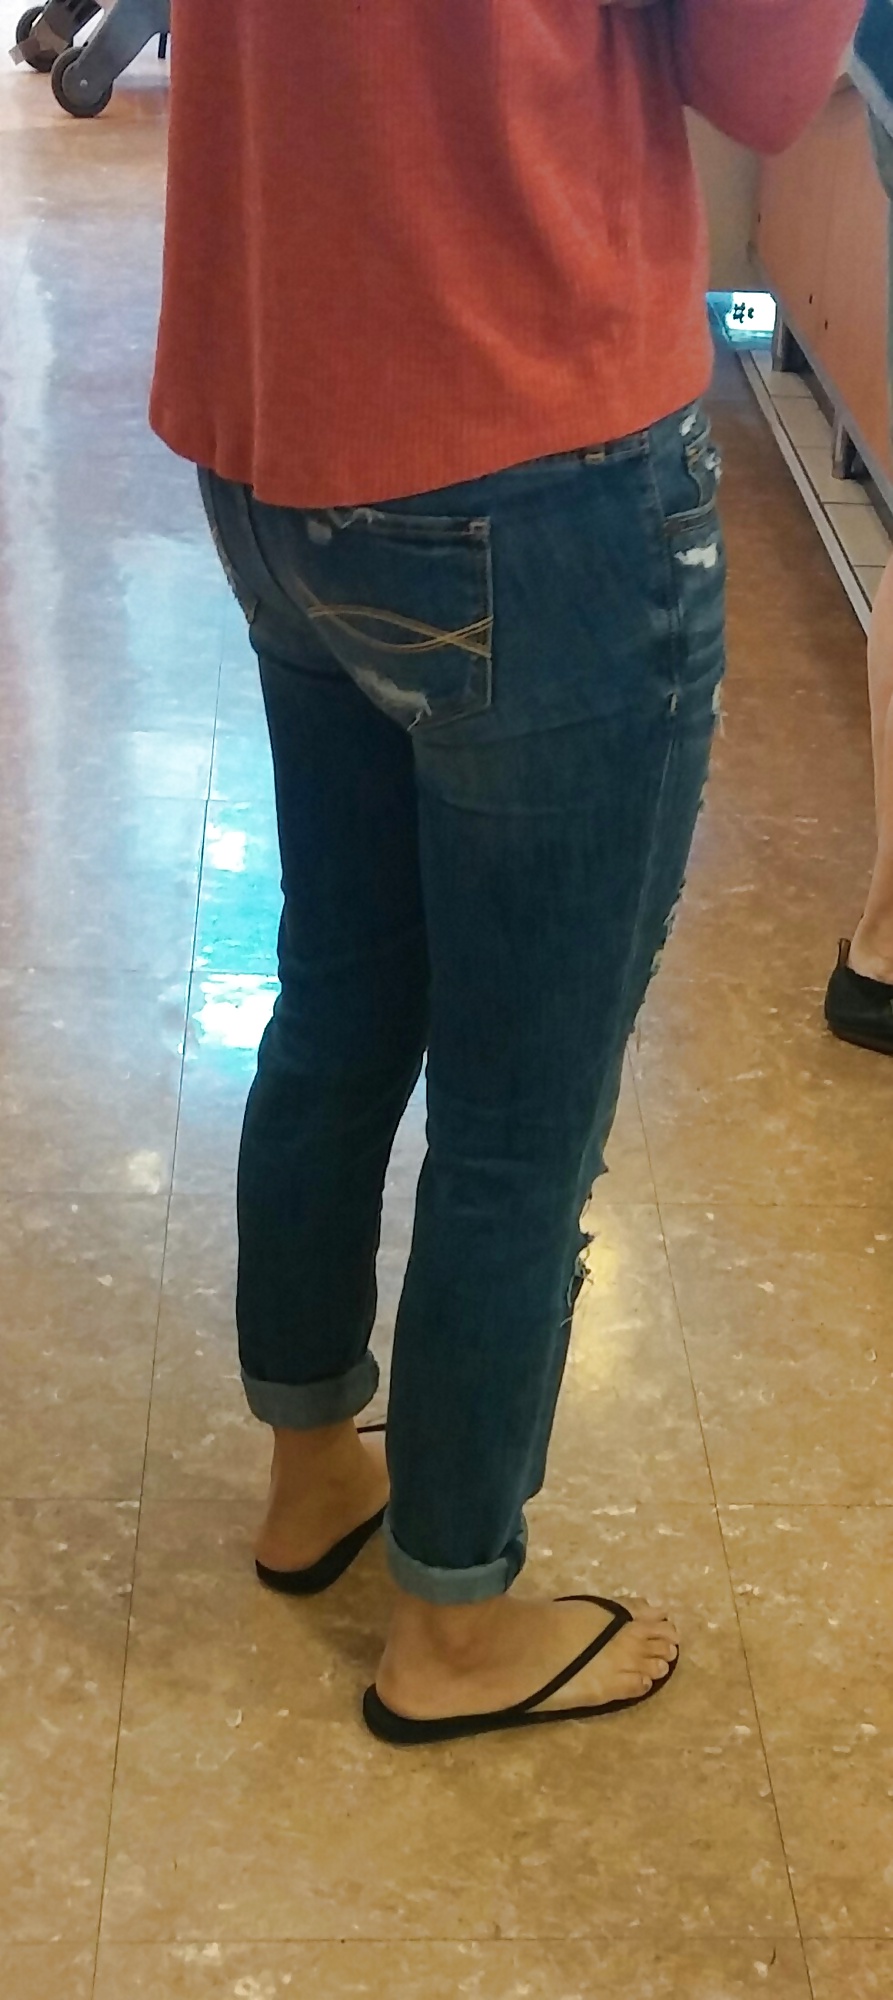 Skinny Asian teen feet and ass in jeans with face. pict gal